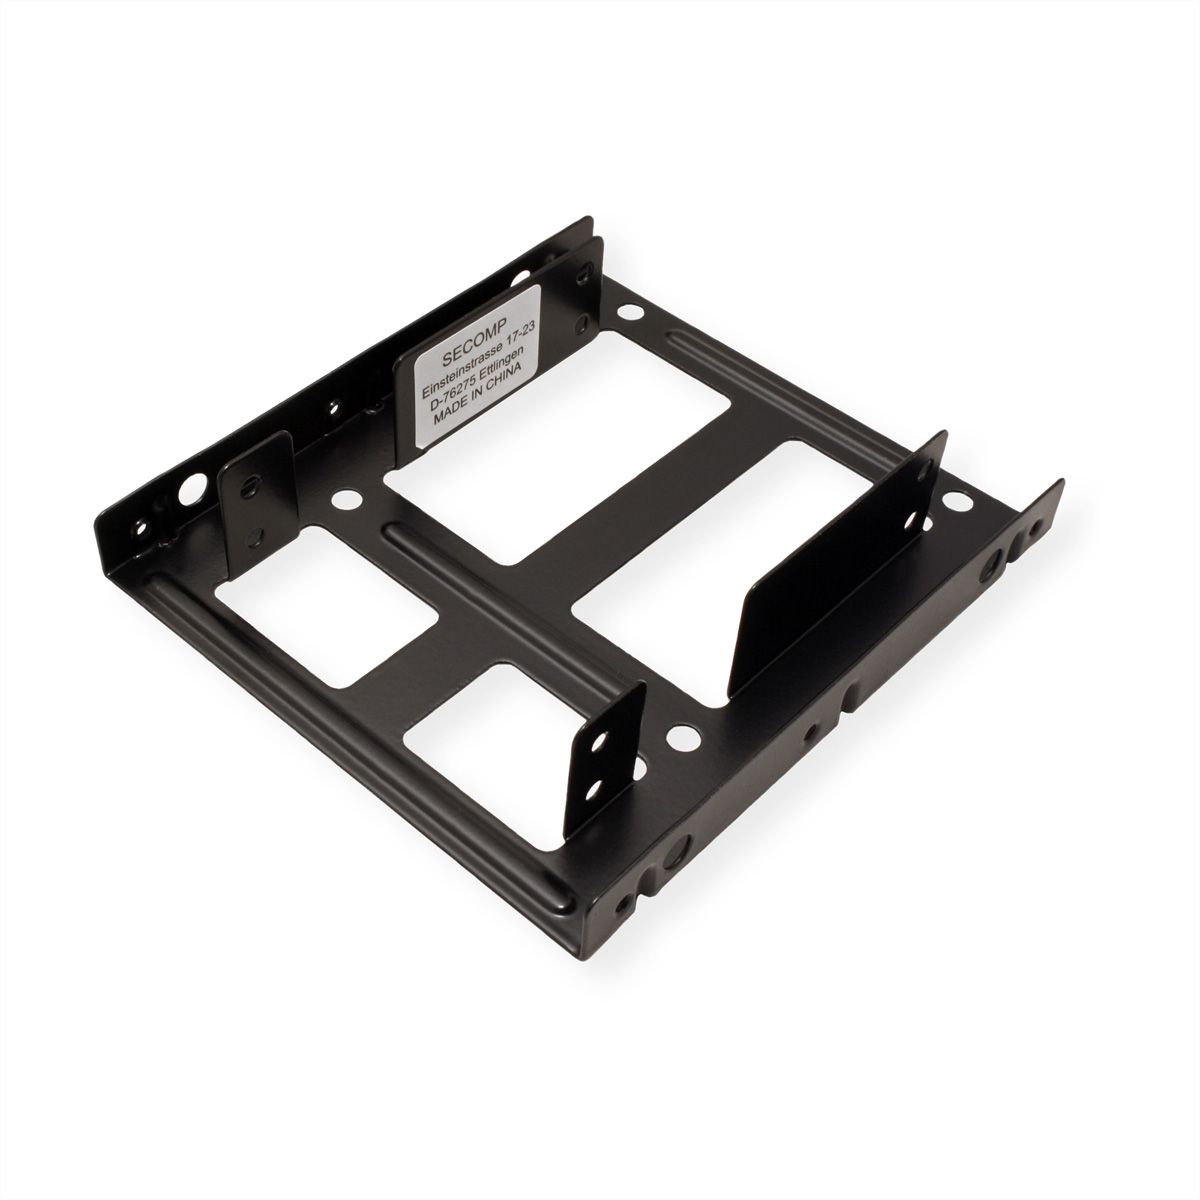 Hdd Ssd Mounting Adapter 3 5 Inch Frame For 2x 2 5 Inch Hdd Ssd Metal Black Secomp International Ag